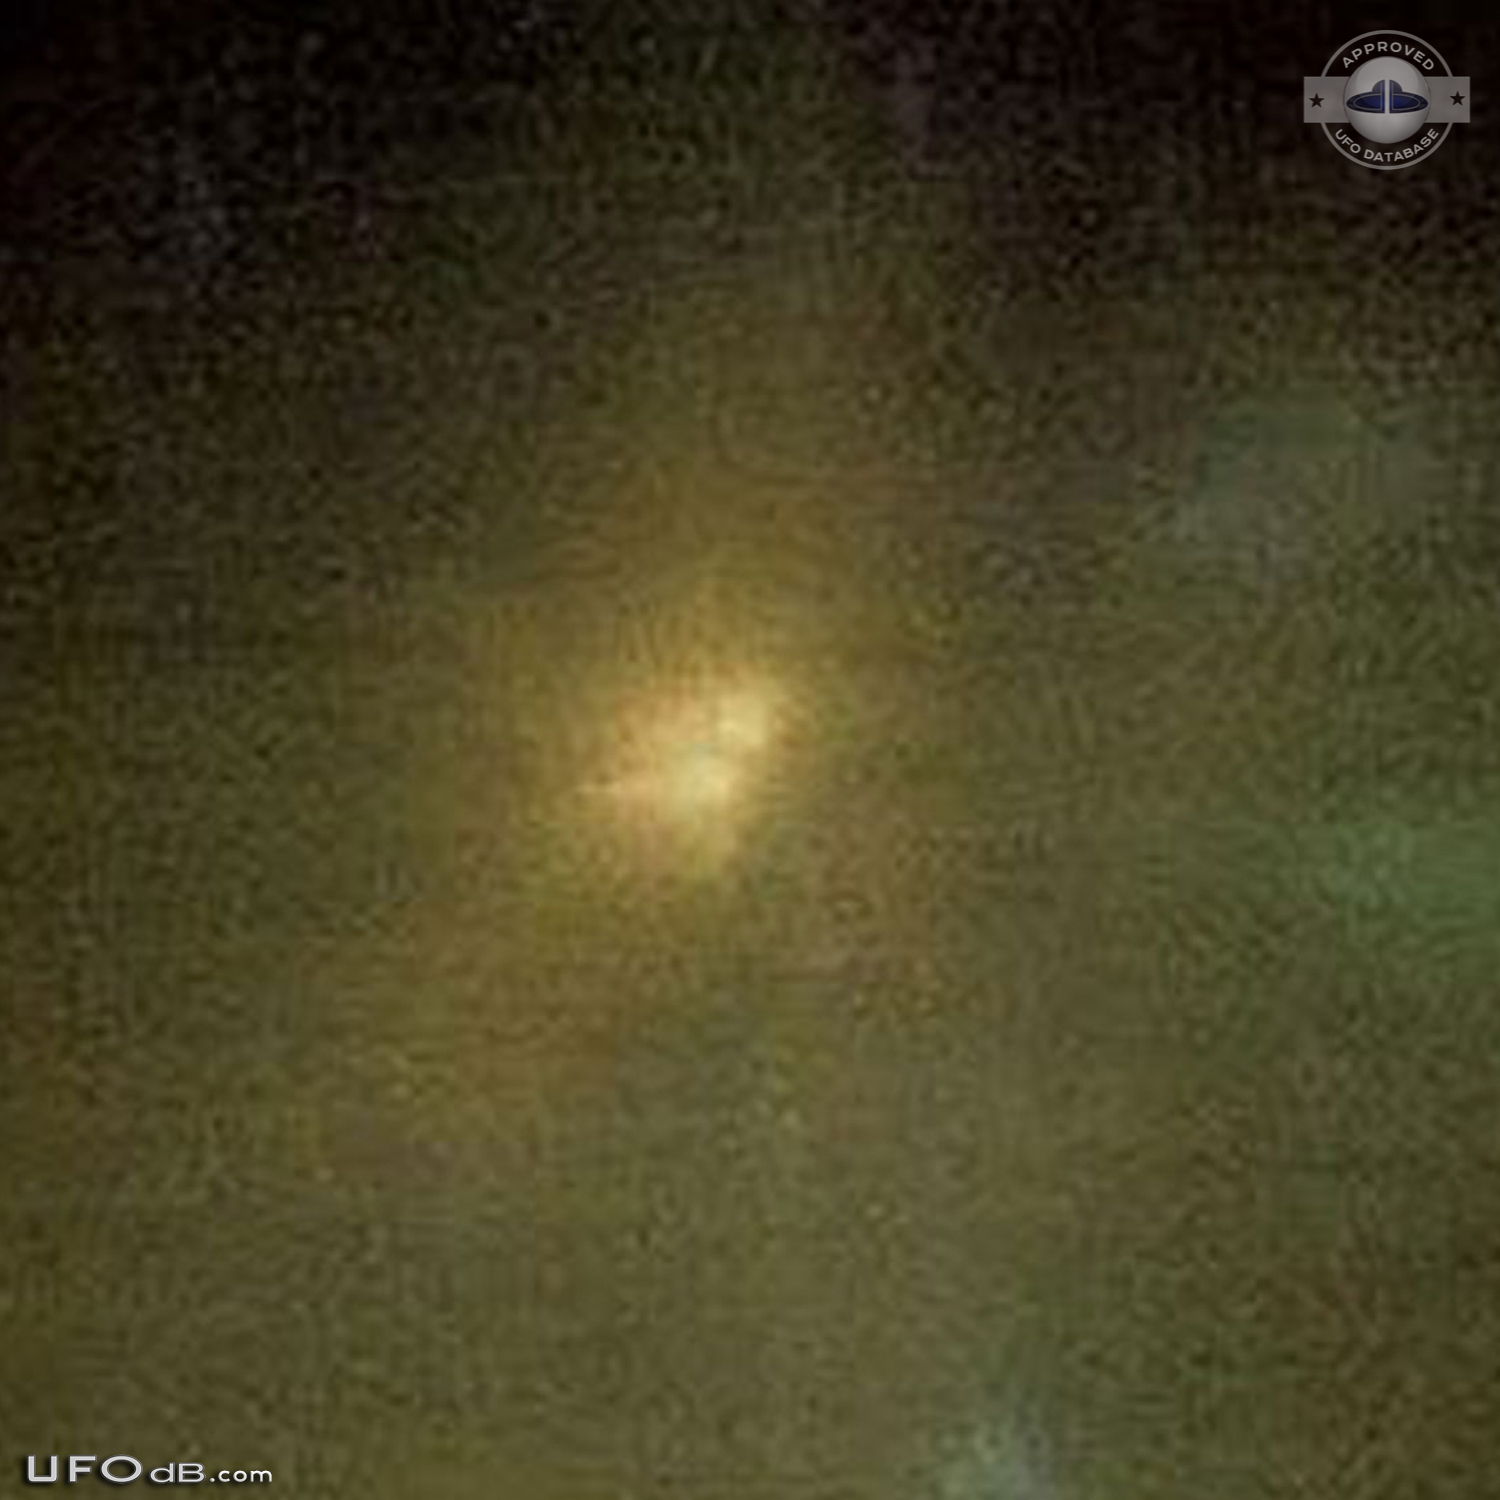 Famous Montreal Canada mass ufo sighting of November 7 1990 UFO Picture #546-4